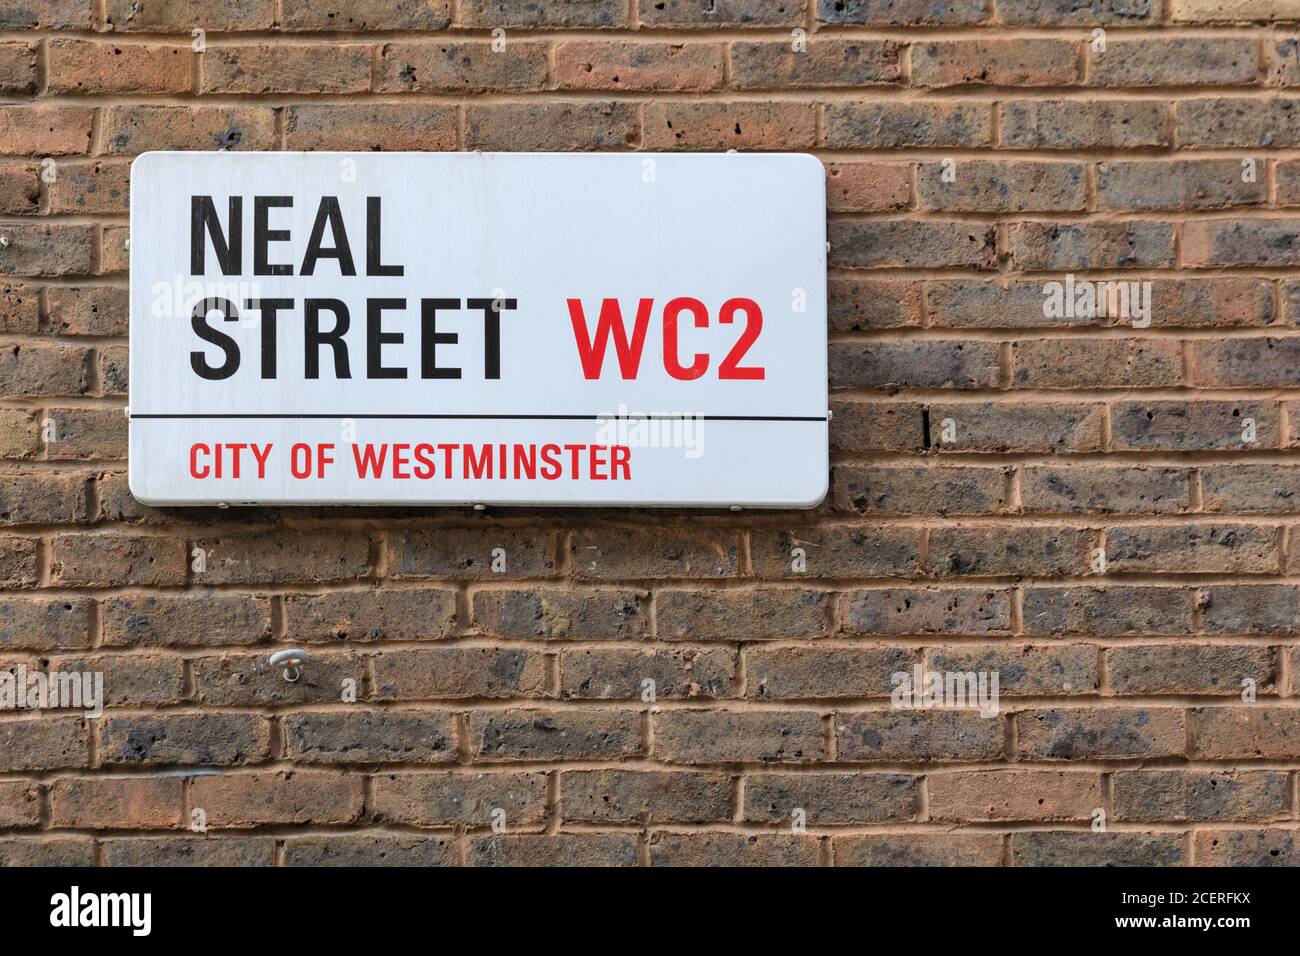 Neal Street, WC2, City of Westminster, Covent Garden street sign, London, England Stock Photo